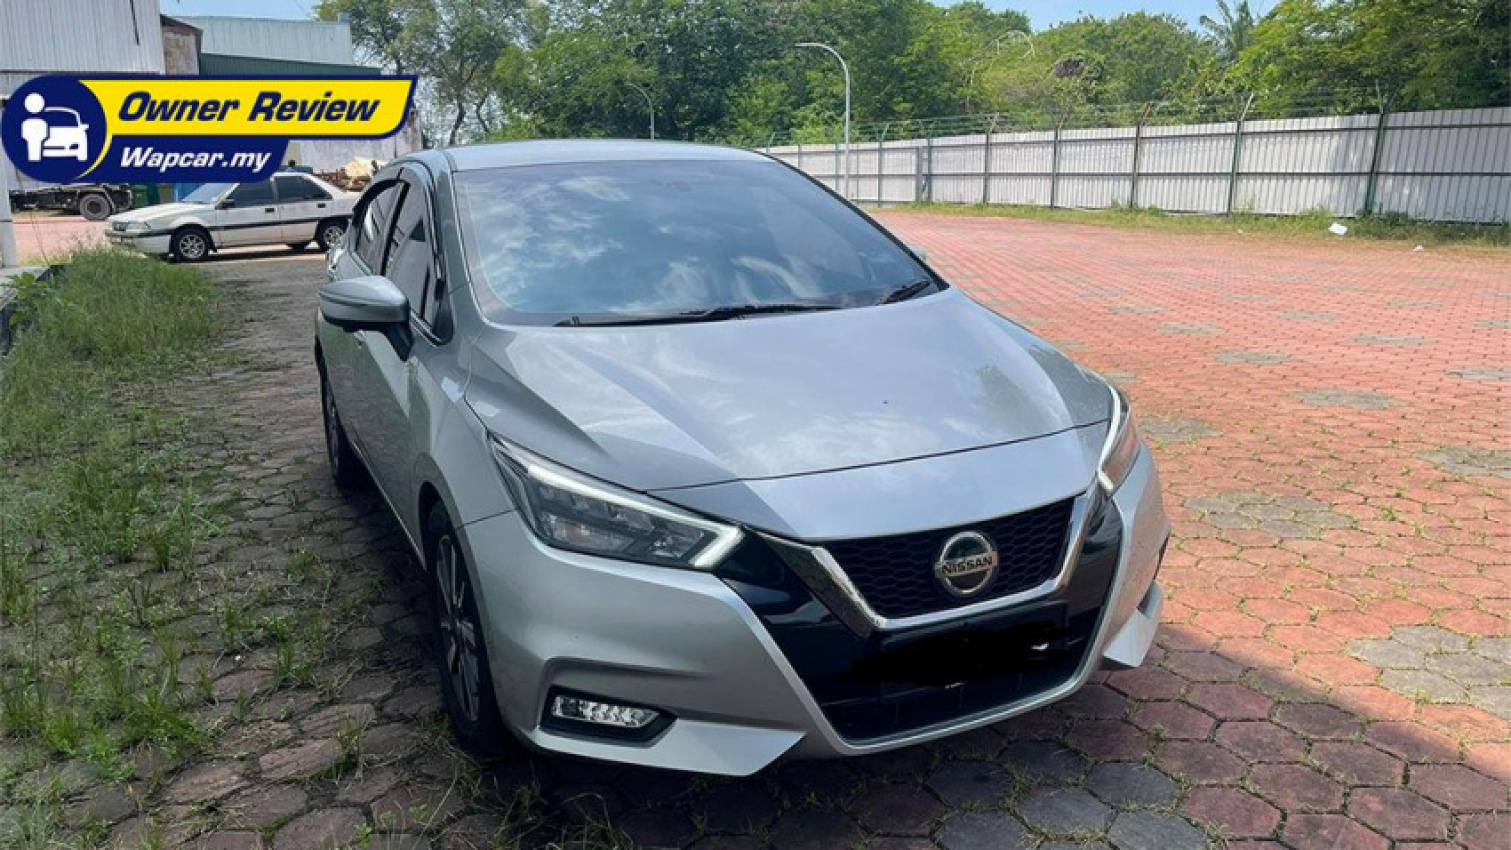 autos, cars, nissan, owner review:  into 23, (ni-san), from almera to almera. my 2020 nissan almera turbo